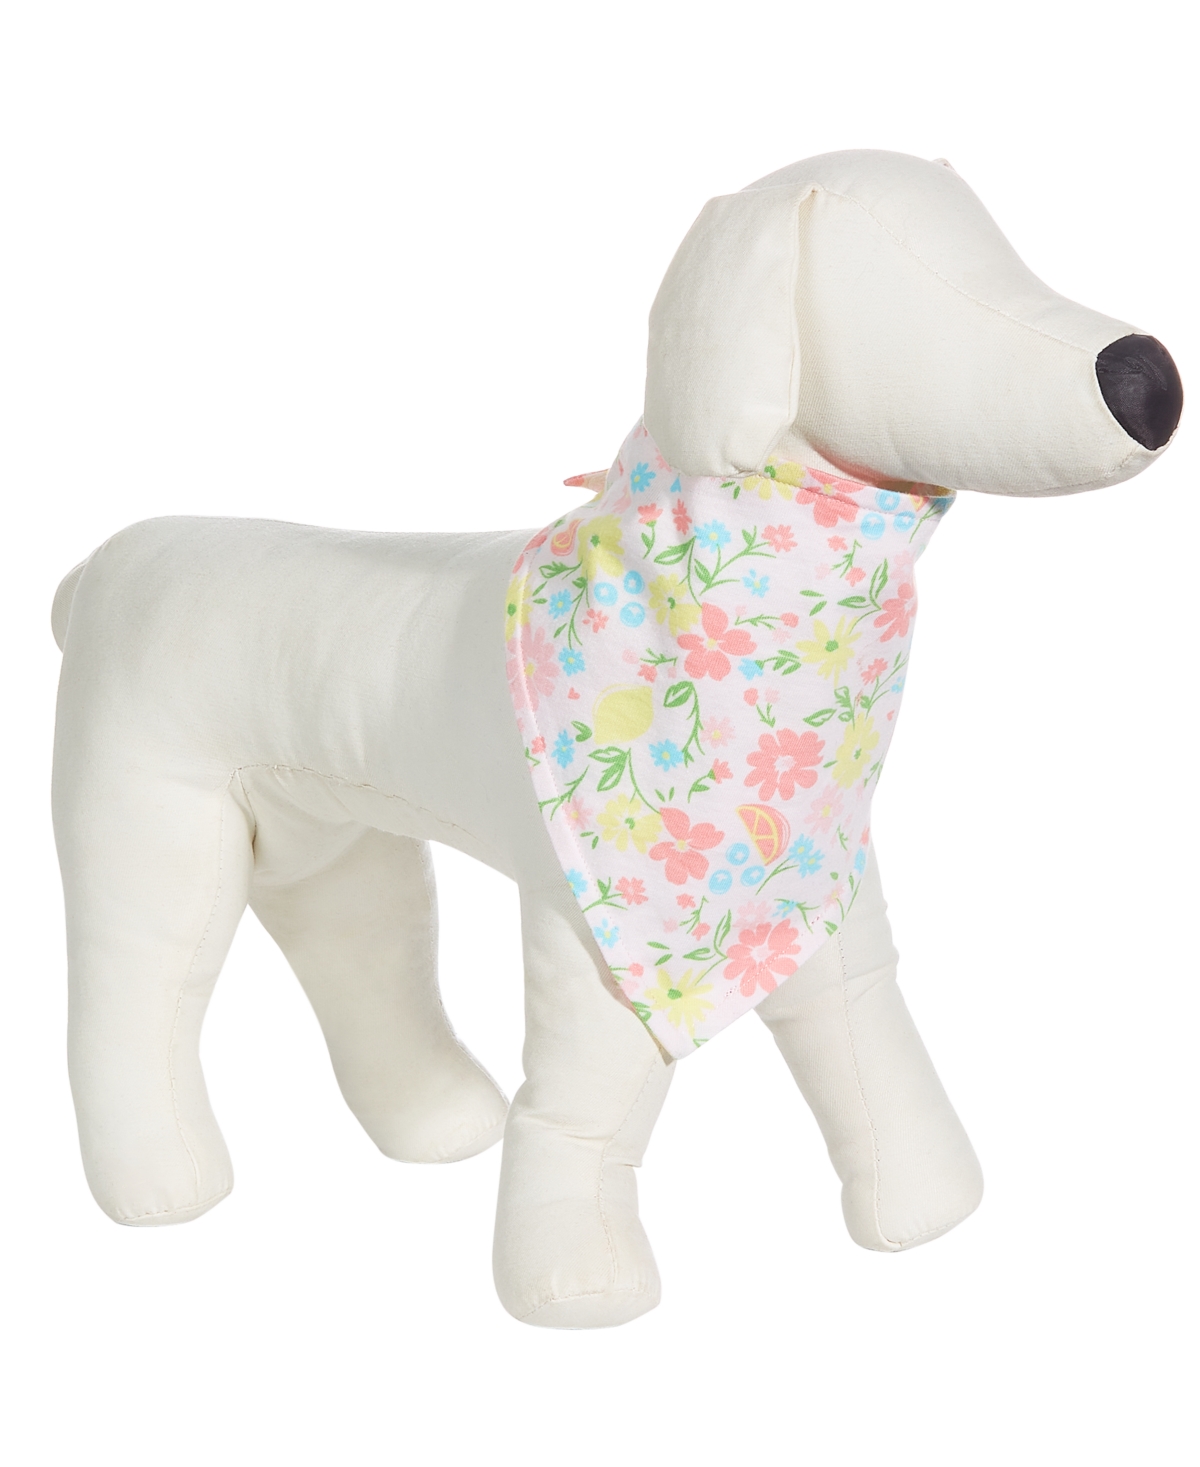 Fruity Floral Pet Bandana, Created for Macy's - Floral Fruits